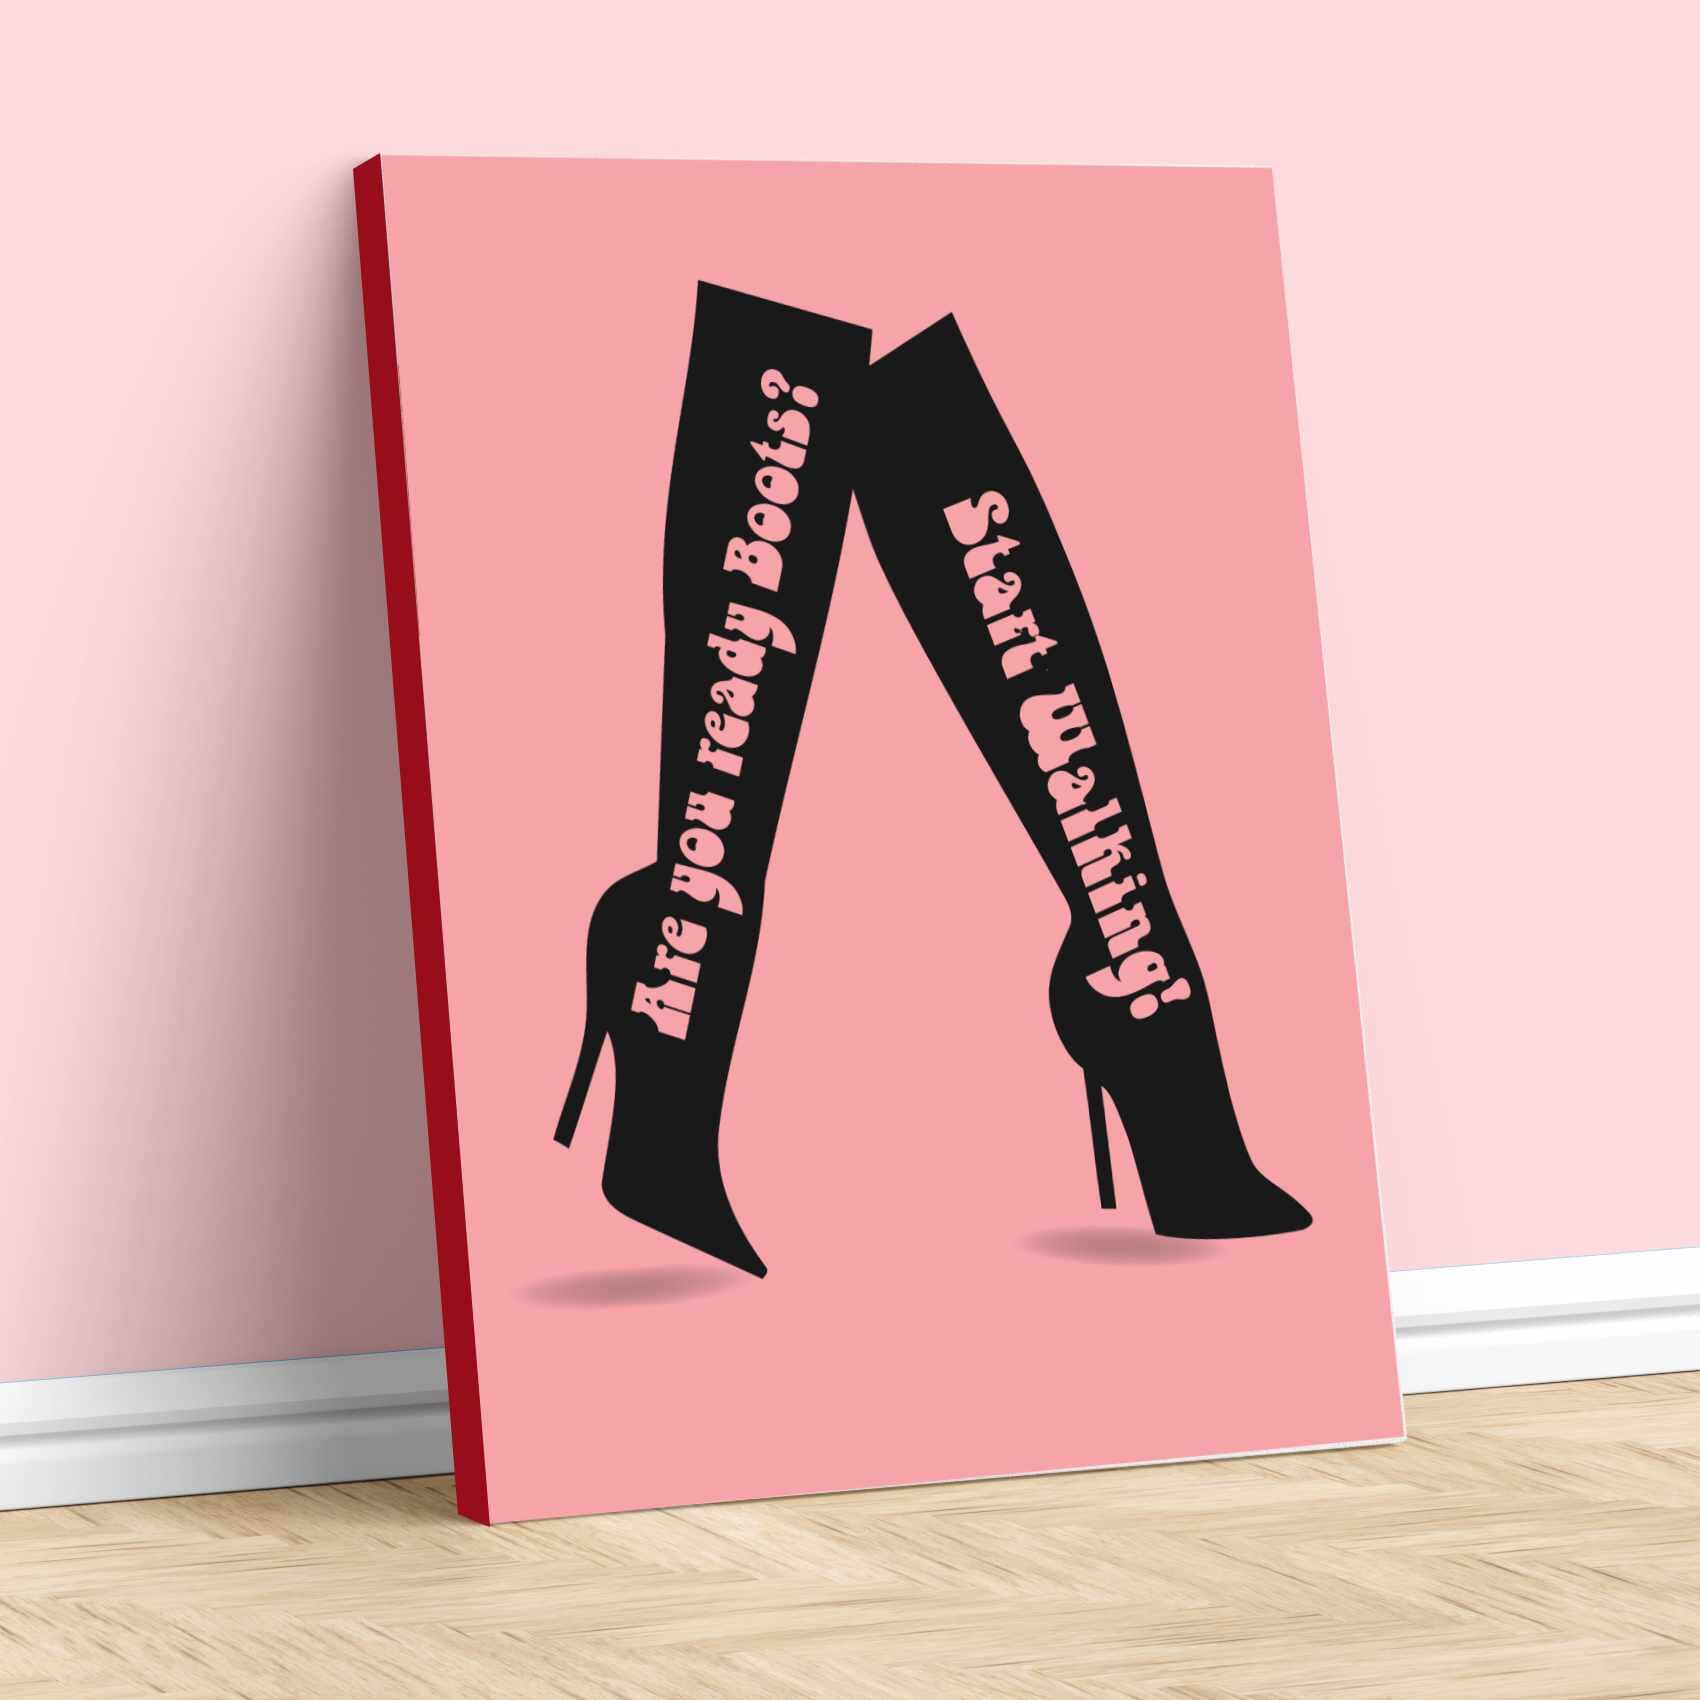 These Boots Are Made for Walkin' by Nancy Sinatra - 60s Art Song Lyrics Art Song Lyrics Art 11x14 Canvas Wrap 